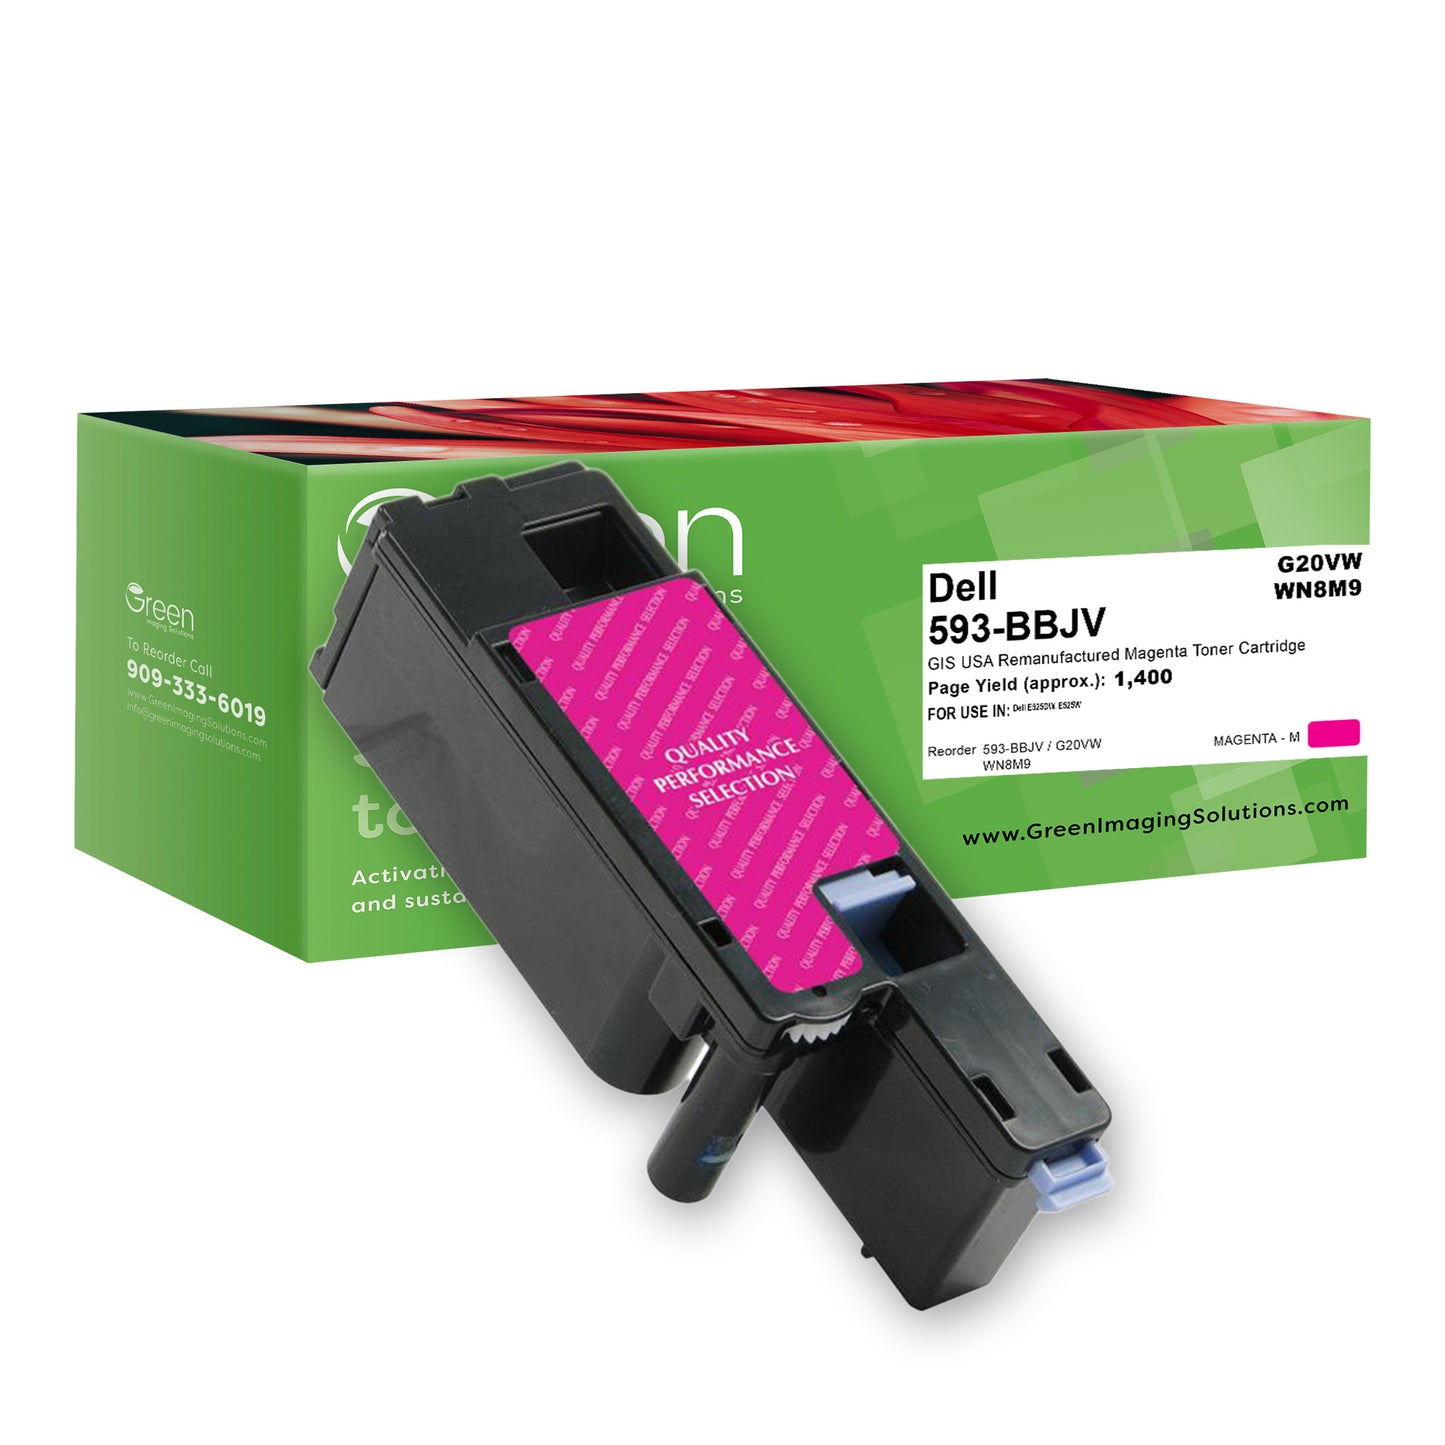 Green Imaging Solutions USA Remanufactured Magenta Toner Cartridge for Dell E525